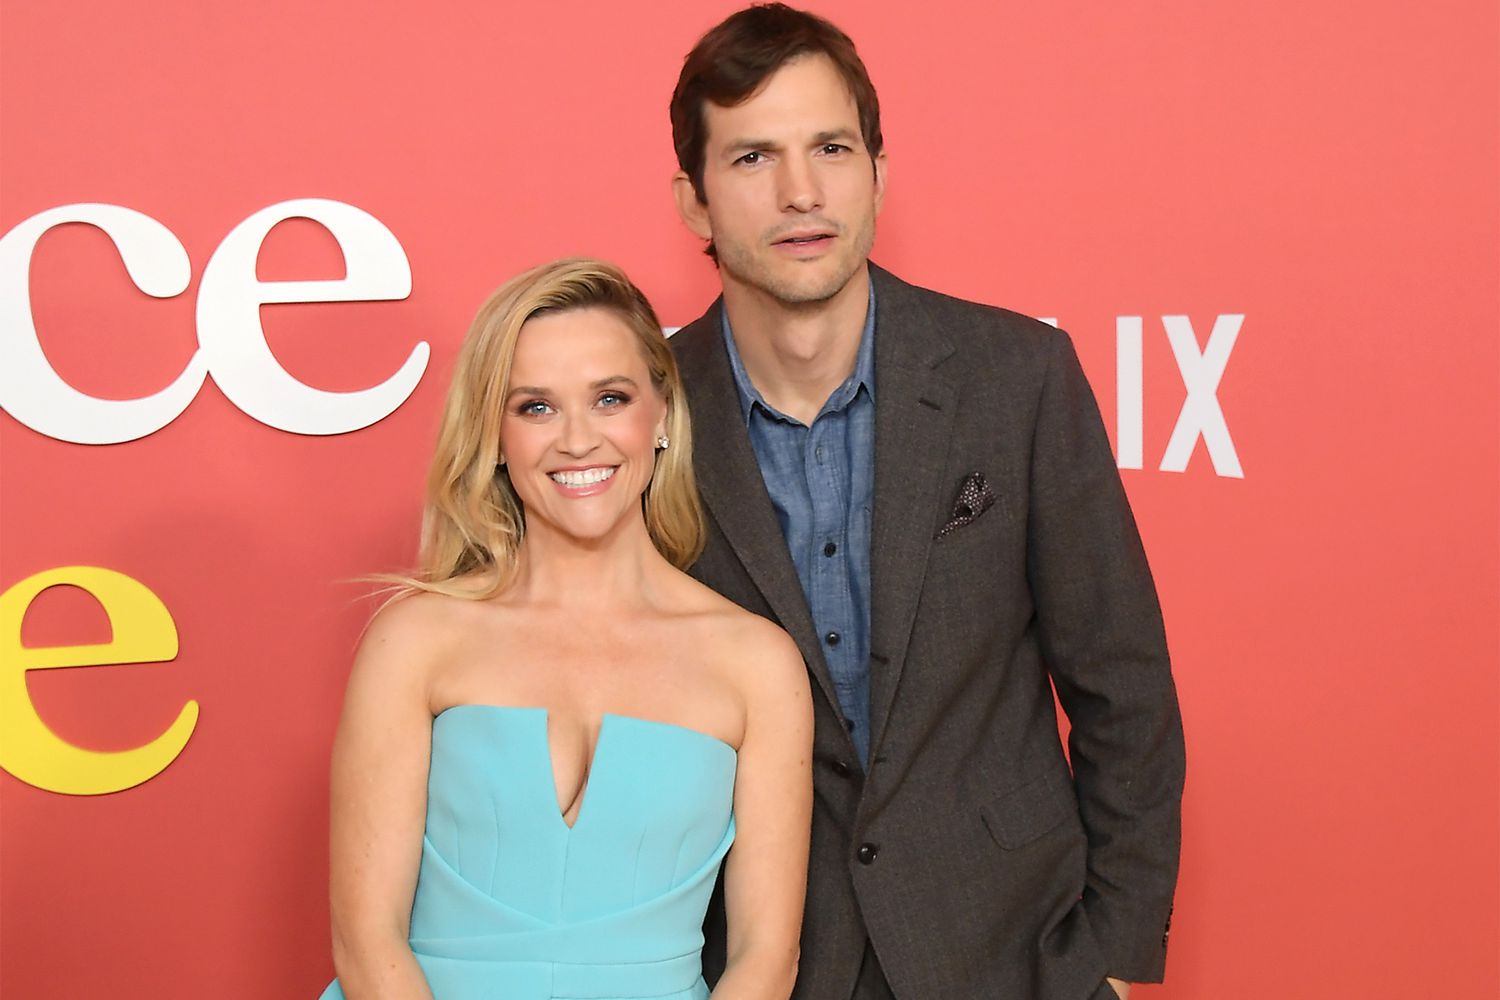 LOS ANGELES, CALIFORNIA - FEBRUARY 02: Reese Witherspoon and Ashton Kutcher attend Netflix's "Your Place or Mine" world premiere at Regency Village Theater on February 02, 2023 in Los Angeles, California. (Photo by Charley Gallay/Getty Images for Netflix)